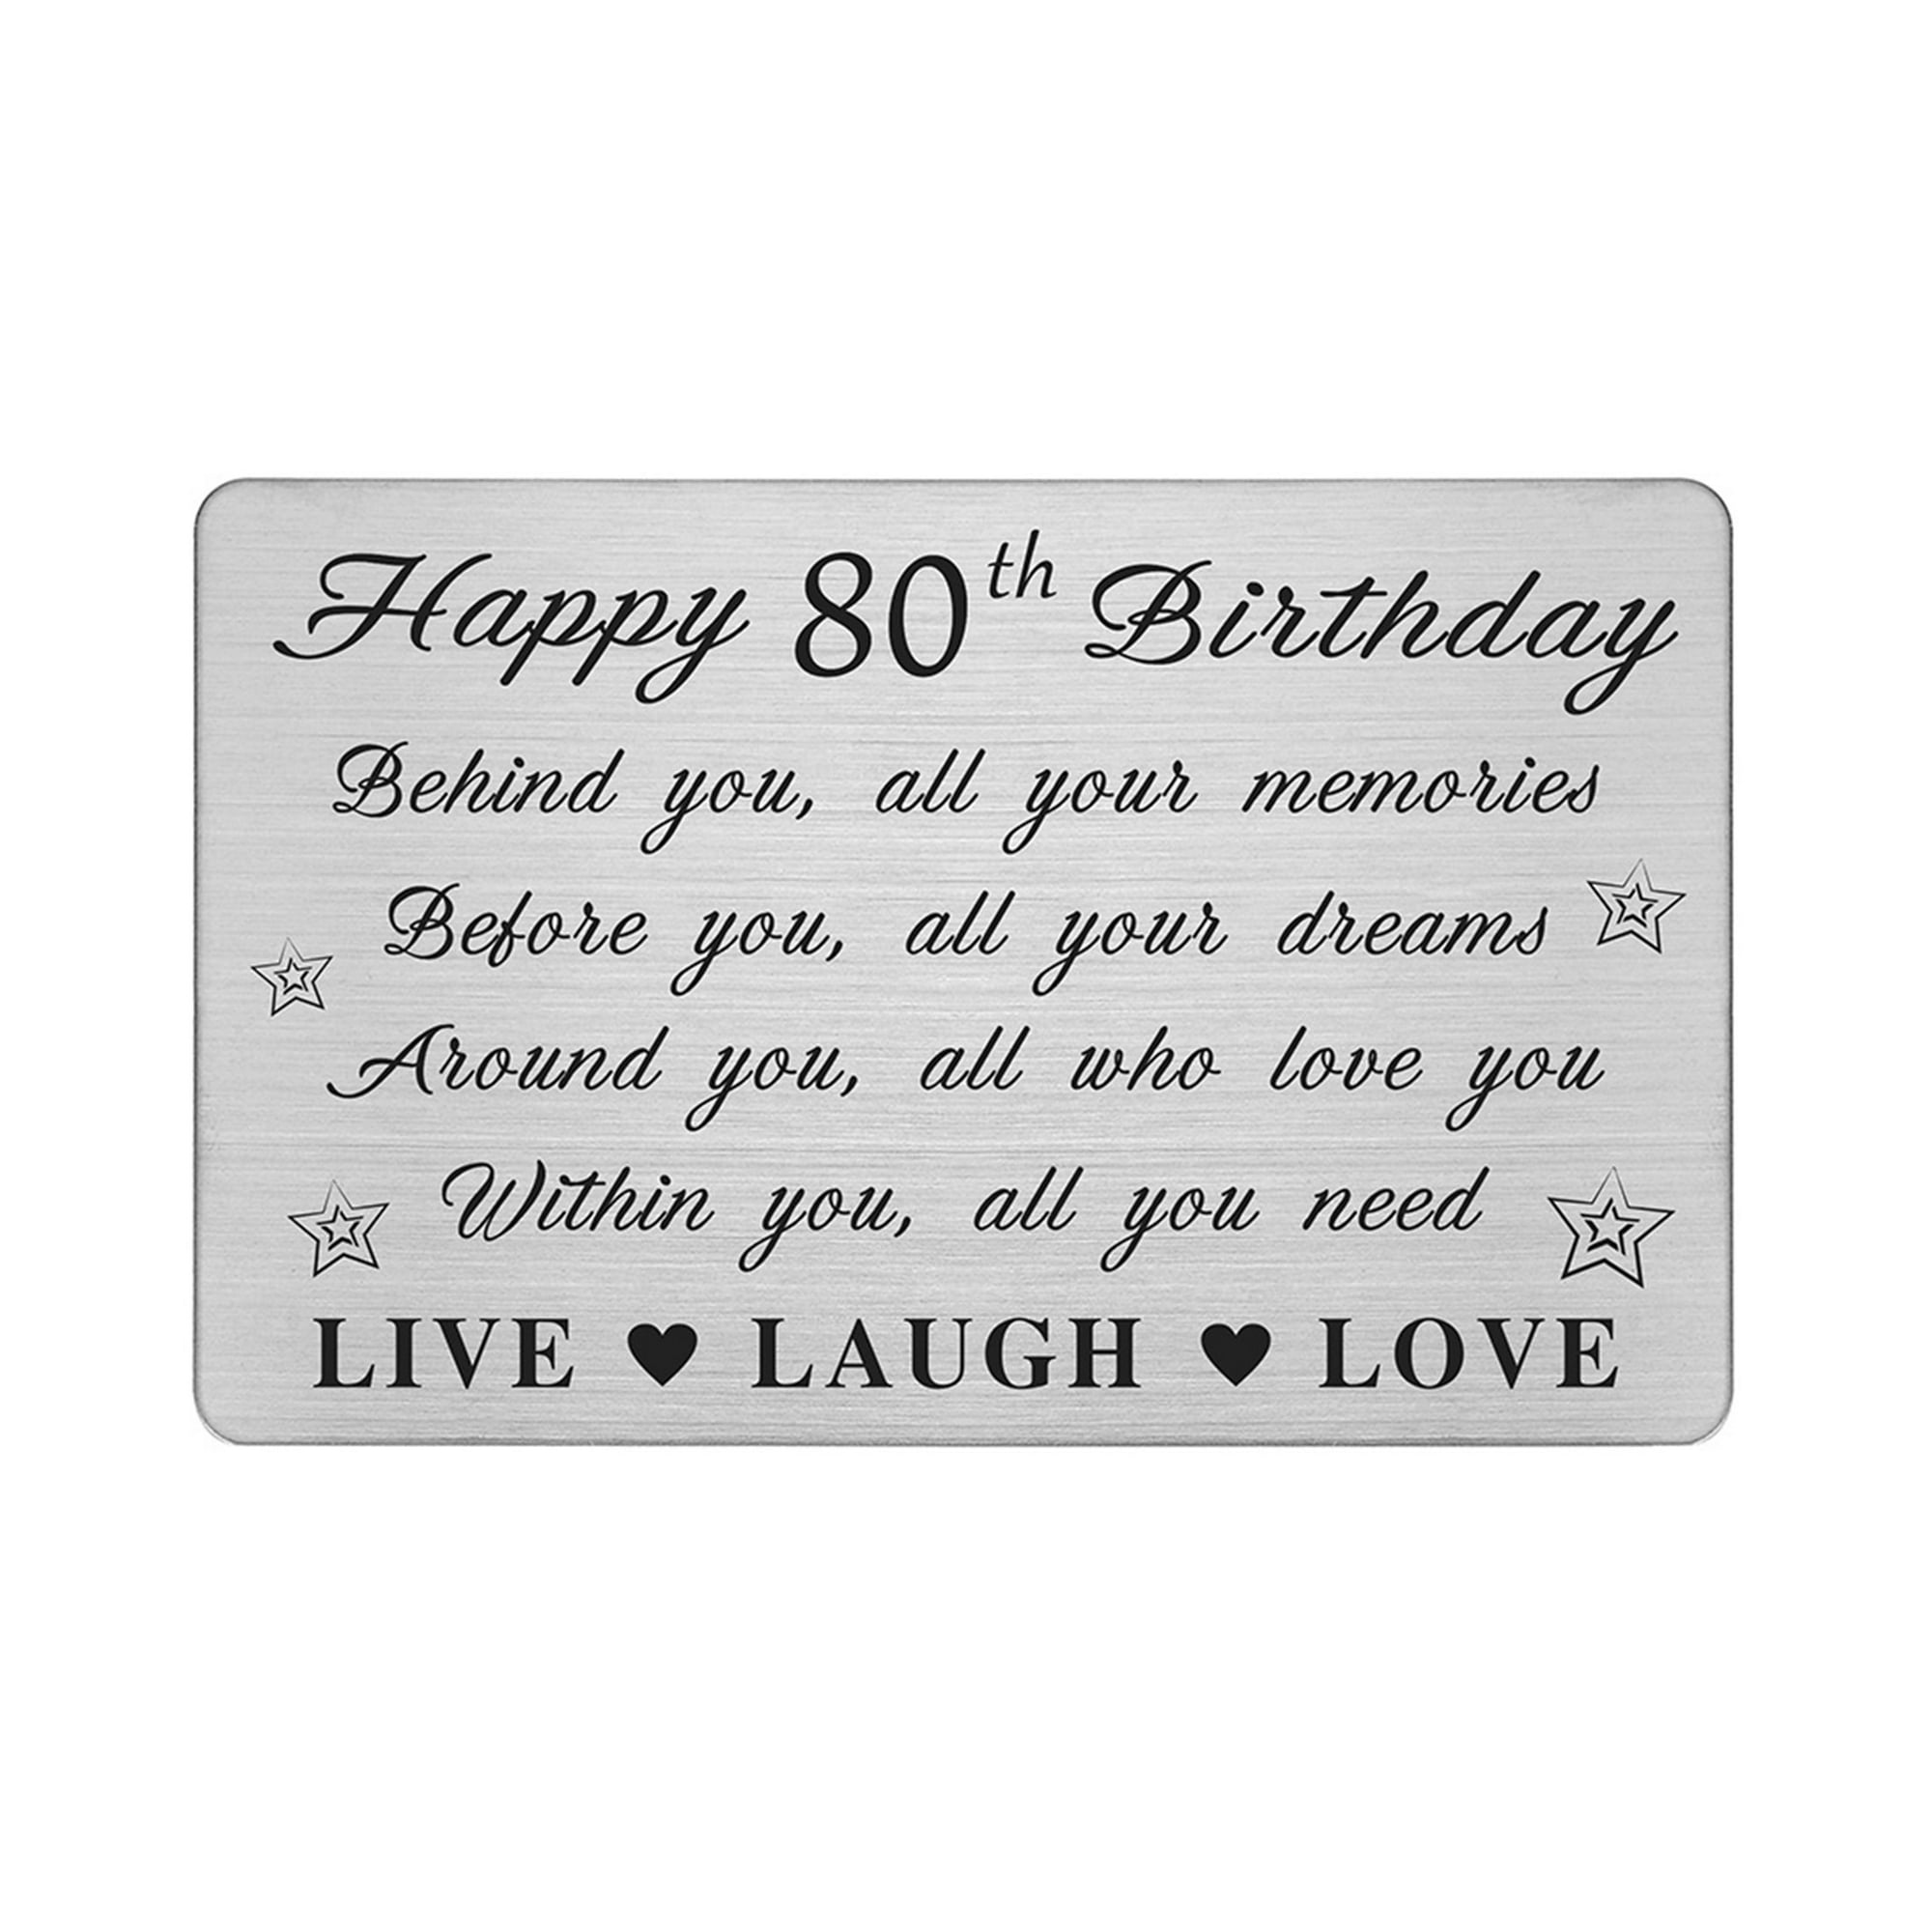 happy 80th birthday messages